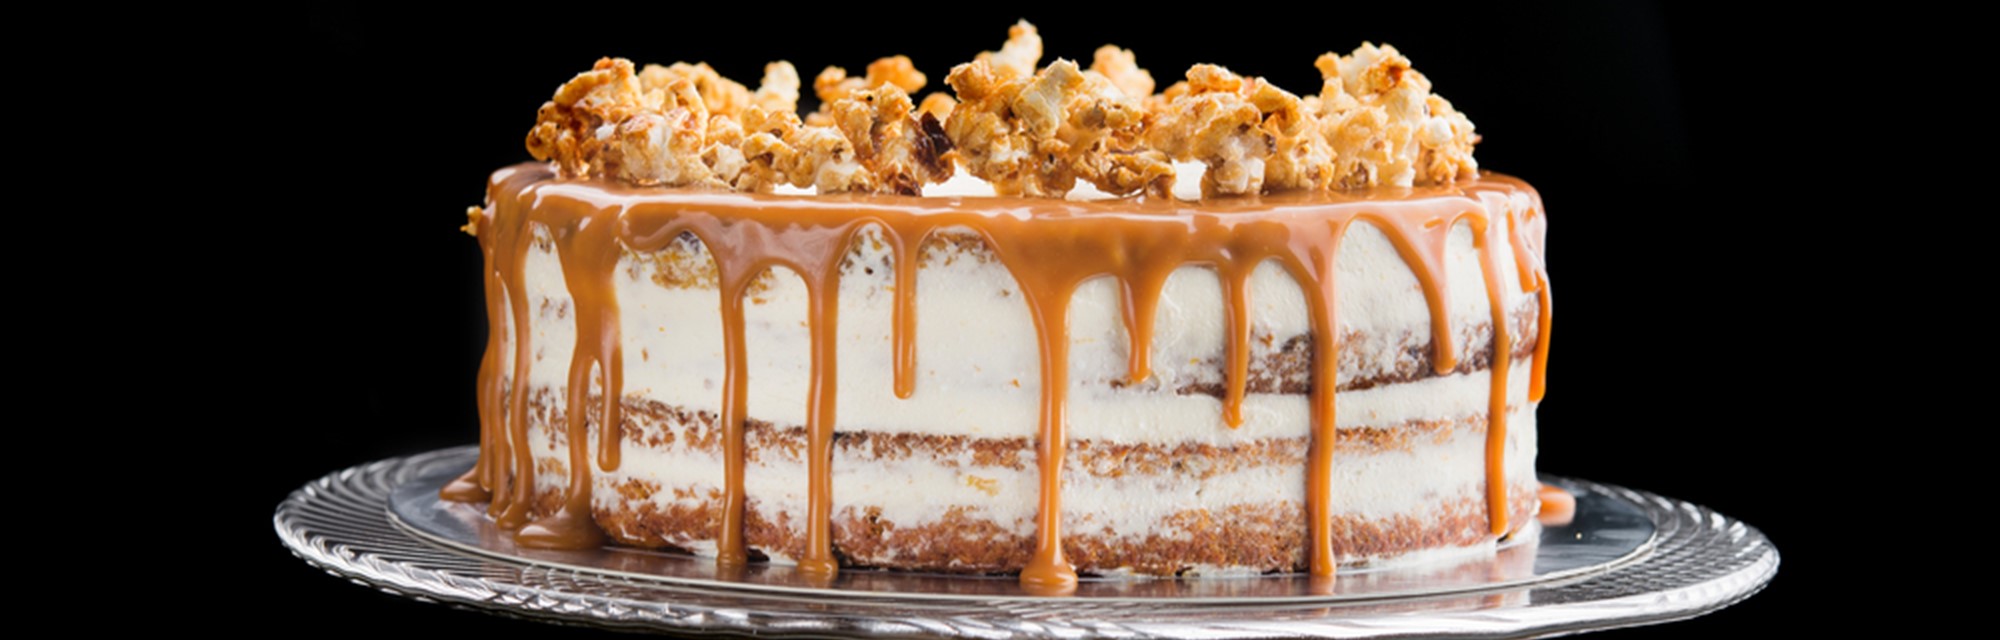 Two-layer chocolate popcorn cake with toffee sauce